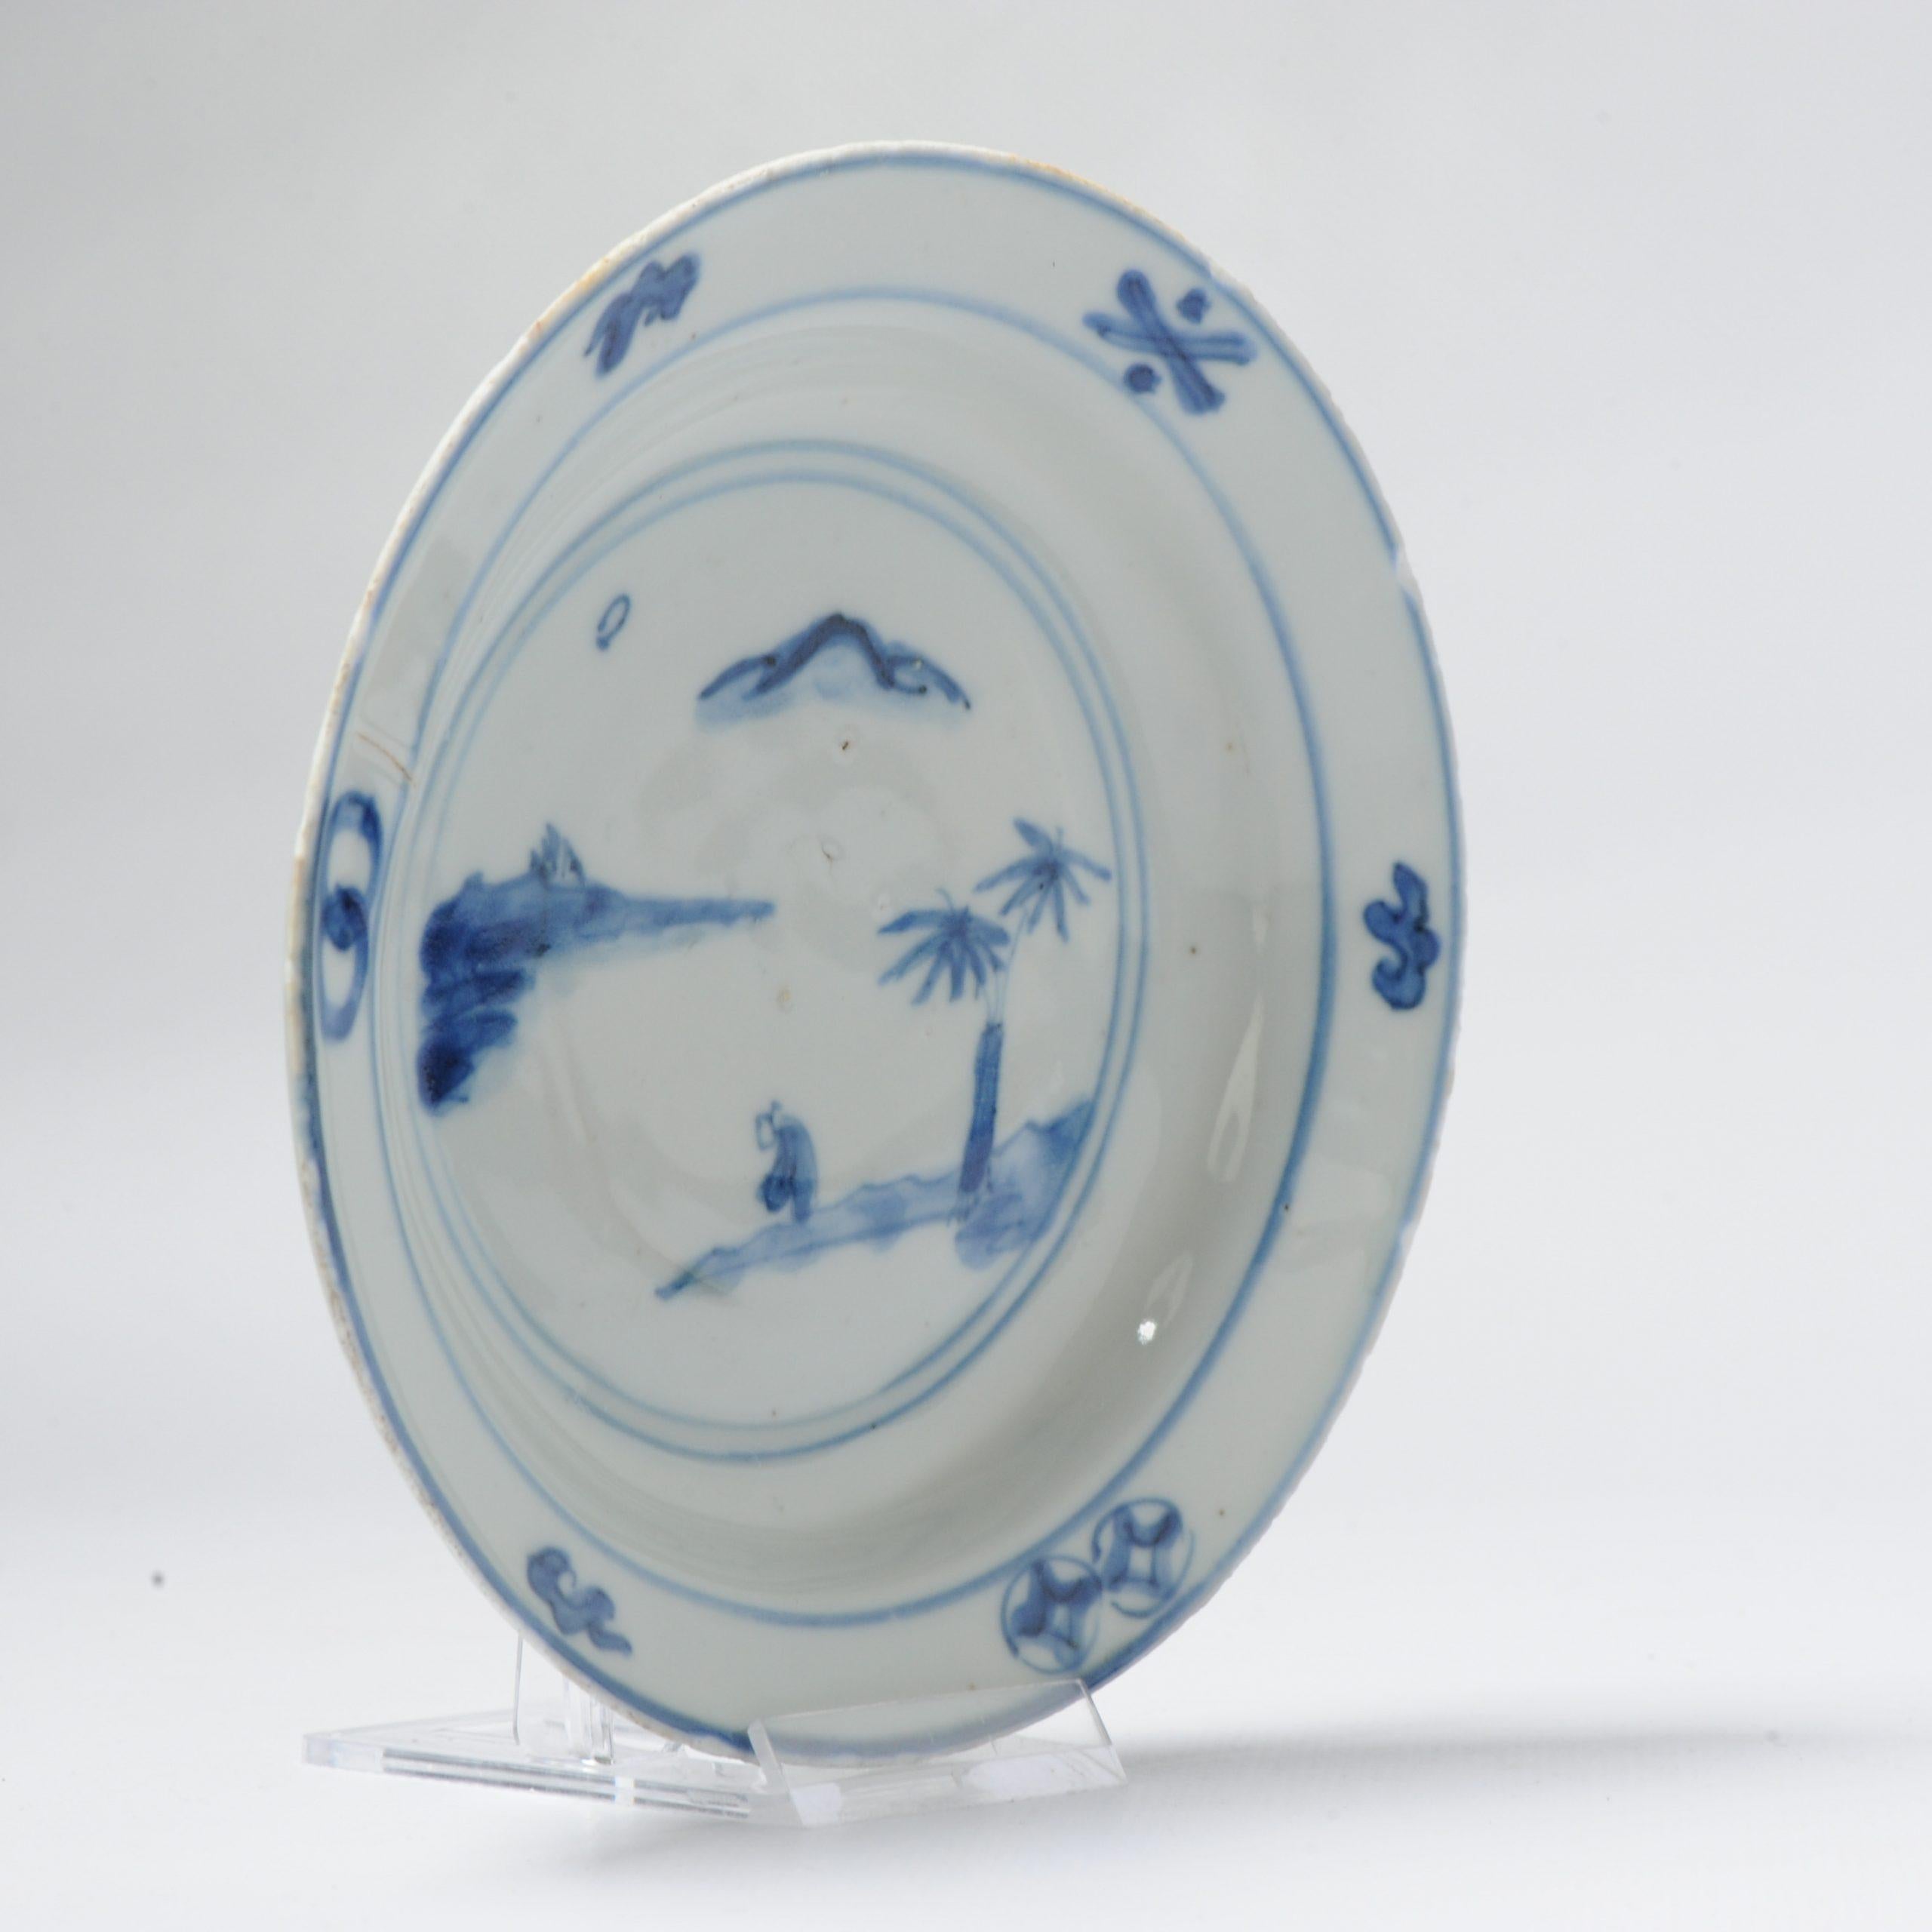 A very nicely decorated kosometsuke plate with a lovely scene with a scholar in a landscape

Ko-sometsuke.

Additional information:
Material: Porcelain & Pottery
Region of Origin: China
Period: 17th century Ming & Transitional (1368 - 1664)
Age: